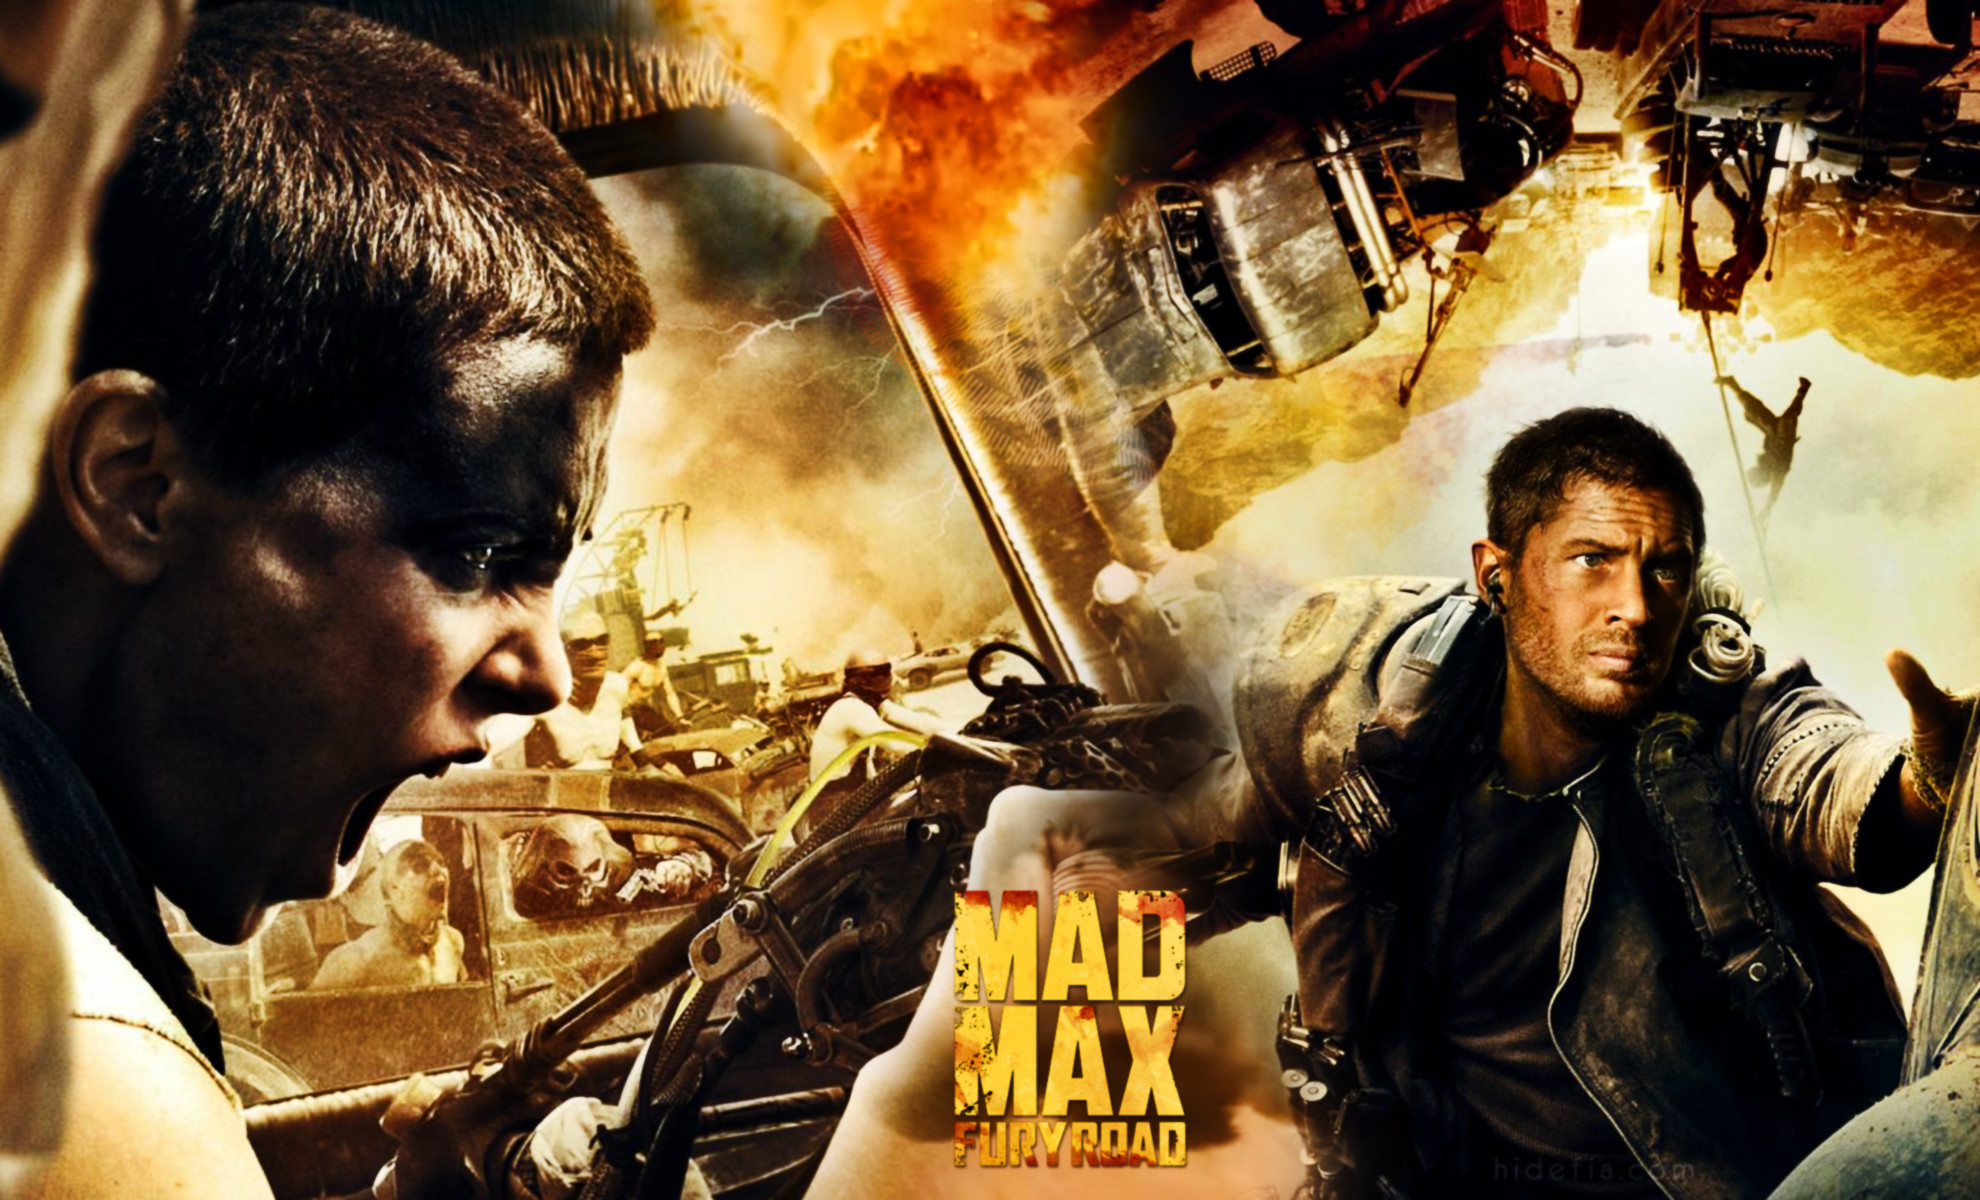 1980x1200 Download Mad Max Fury Road 2015 Fighting Movie Hd Wallpaper Search